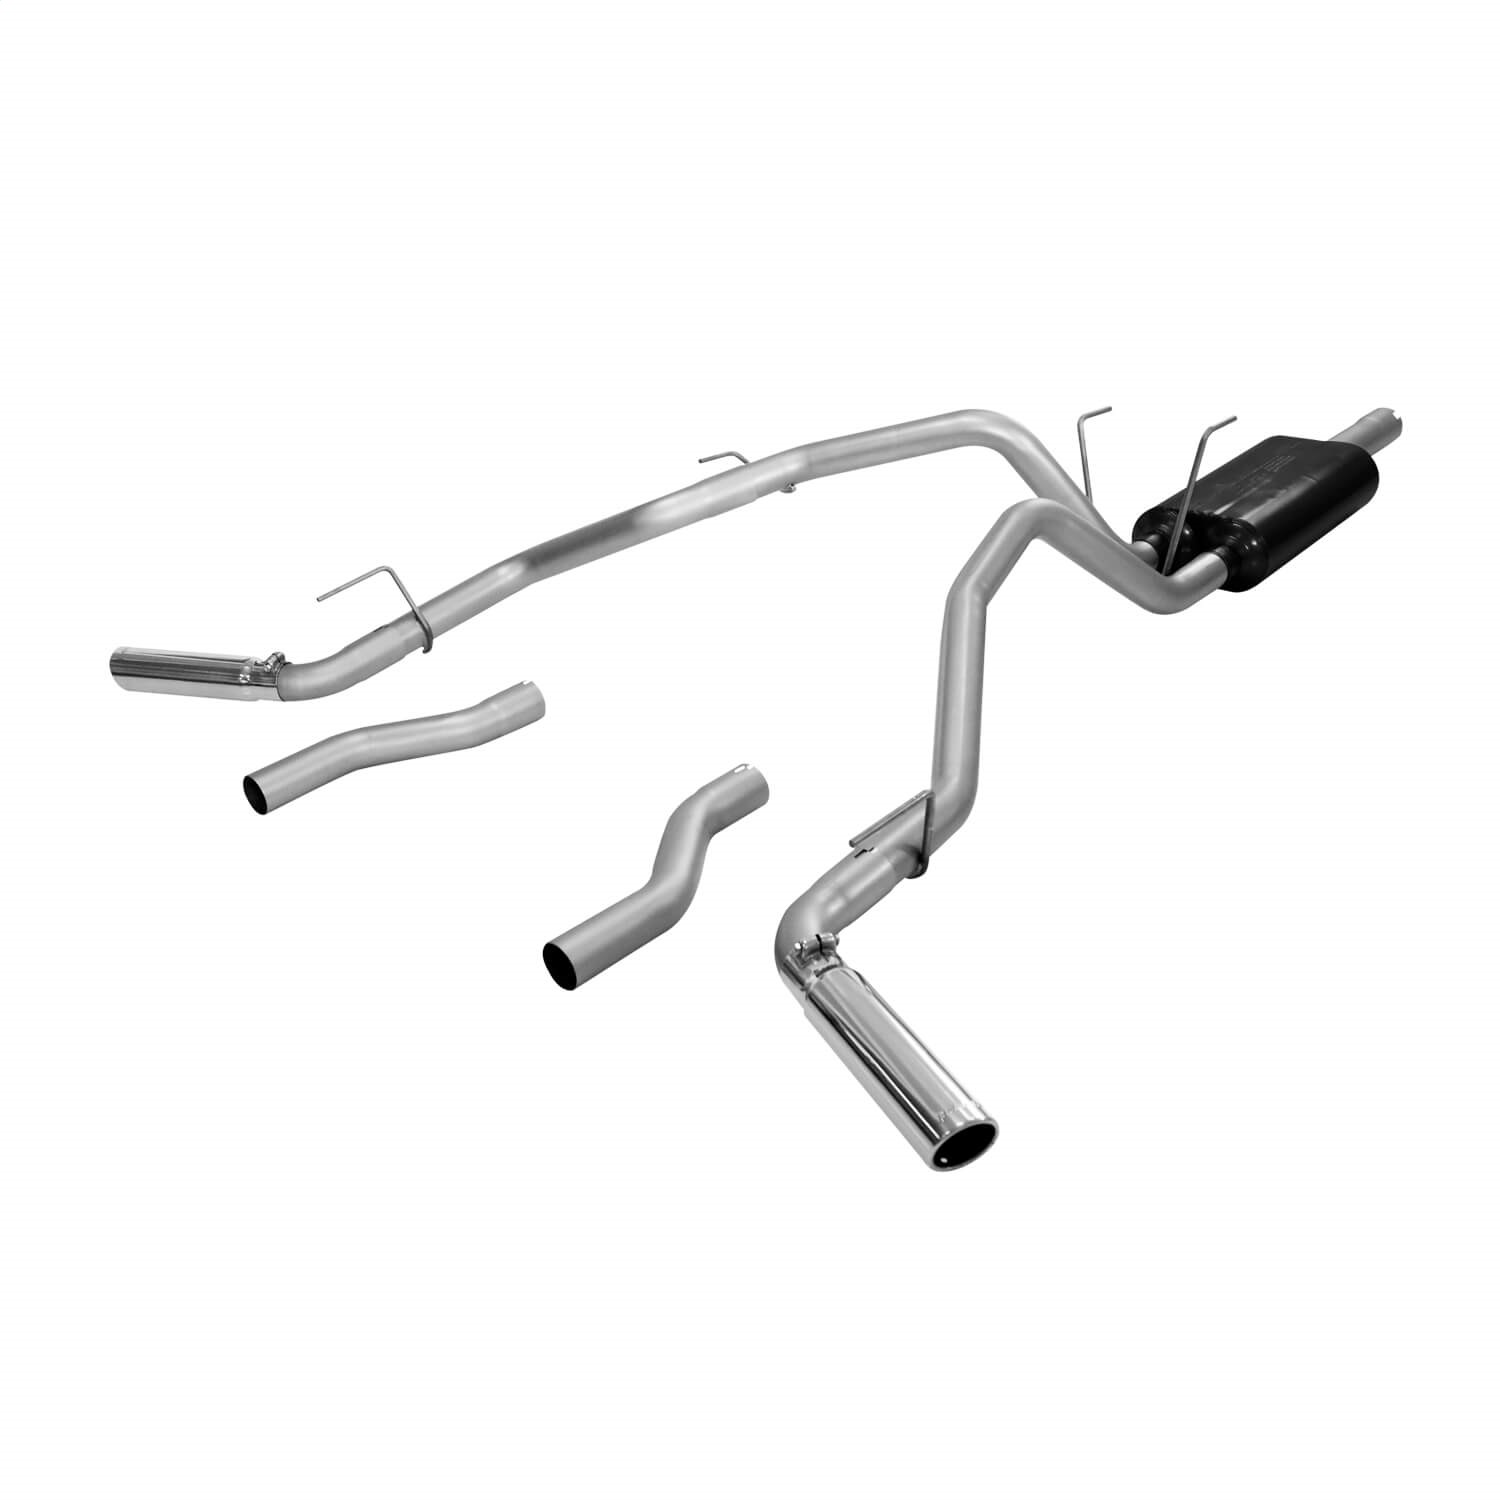 Flowmaster Flowmaster 817490 American Thunder Cat Back Exhaust System Fits 1500 Ram 1500